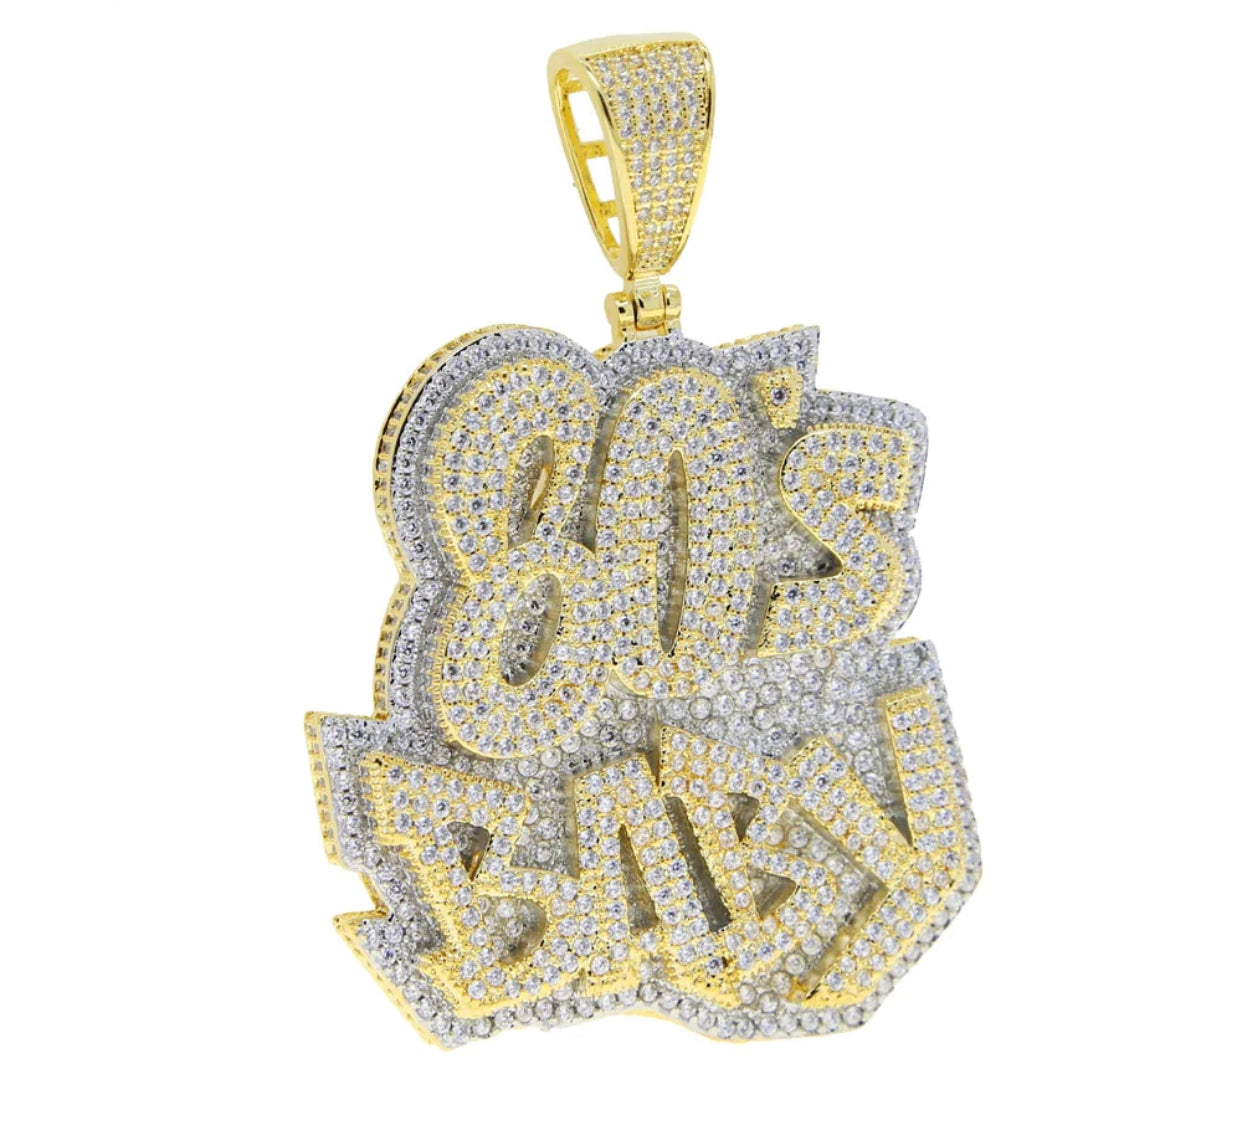 80’s Baby Iced Out Bling Chain Necklace Cubic Zirconia Jewelry